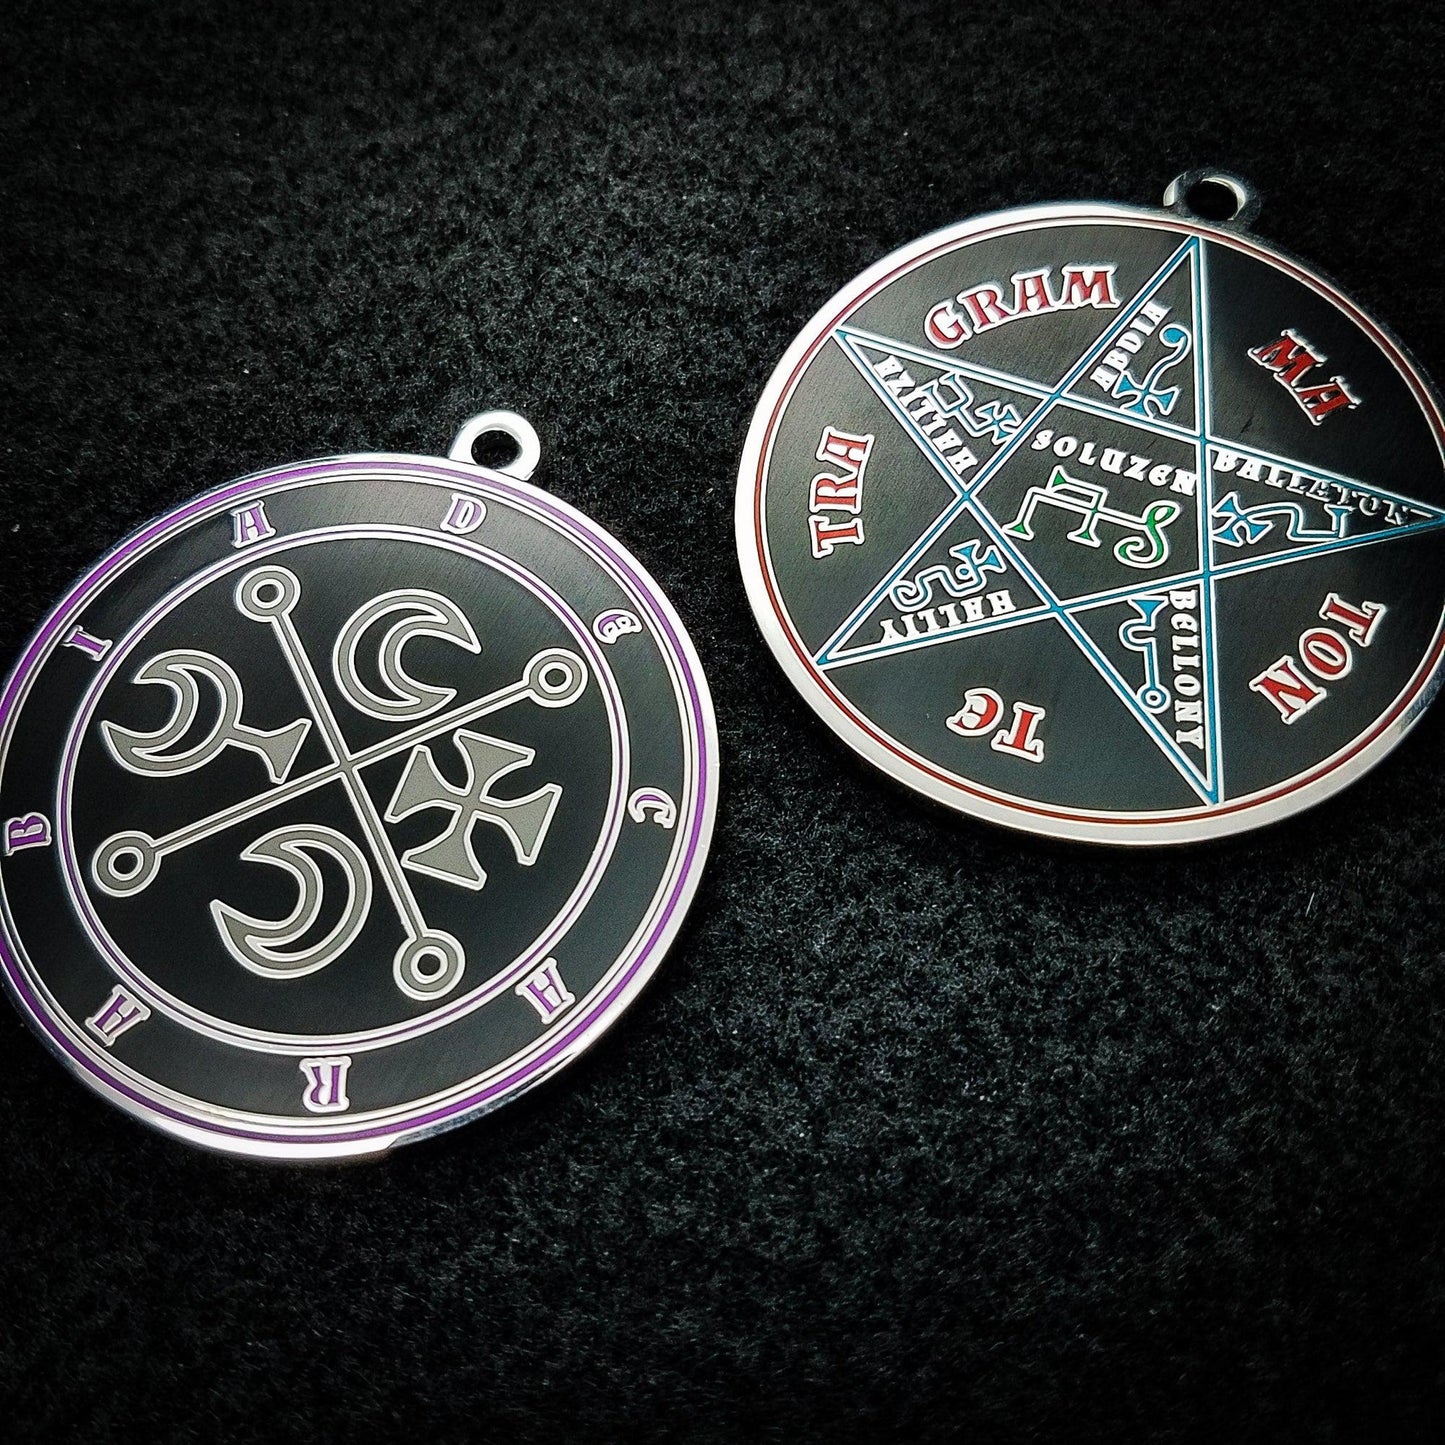 Decarabia sigil pendant with pentacle of solomon on reverse side